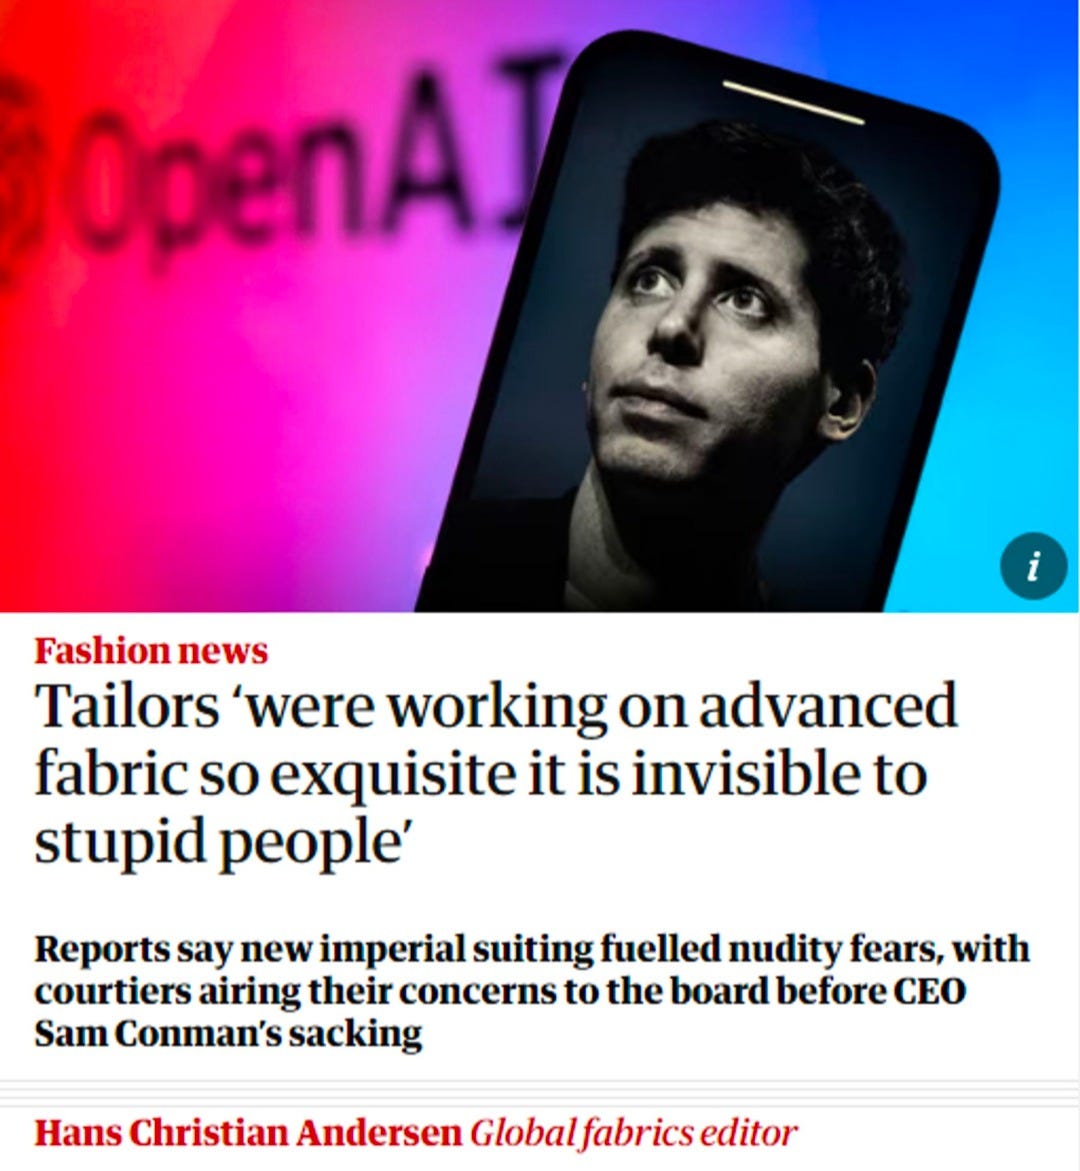 May be an image of 1 person, suit and text that says 'OpenAT i Fashion news Tailors were working on advanced fabric so exquisite it is invisible to stupid people' say new imperial suiting fuelled nudity fears, with courtiers airing their concerns to the board before CEO Sam Conman's sacking Hans Christian Andersen Globalfabrics editor'